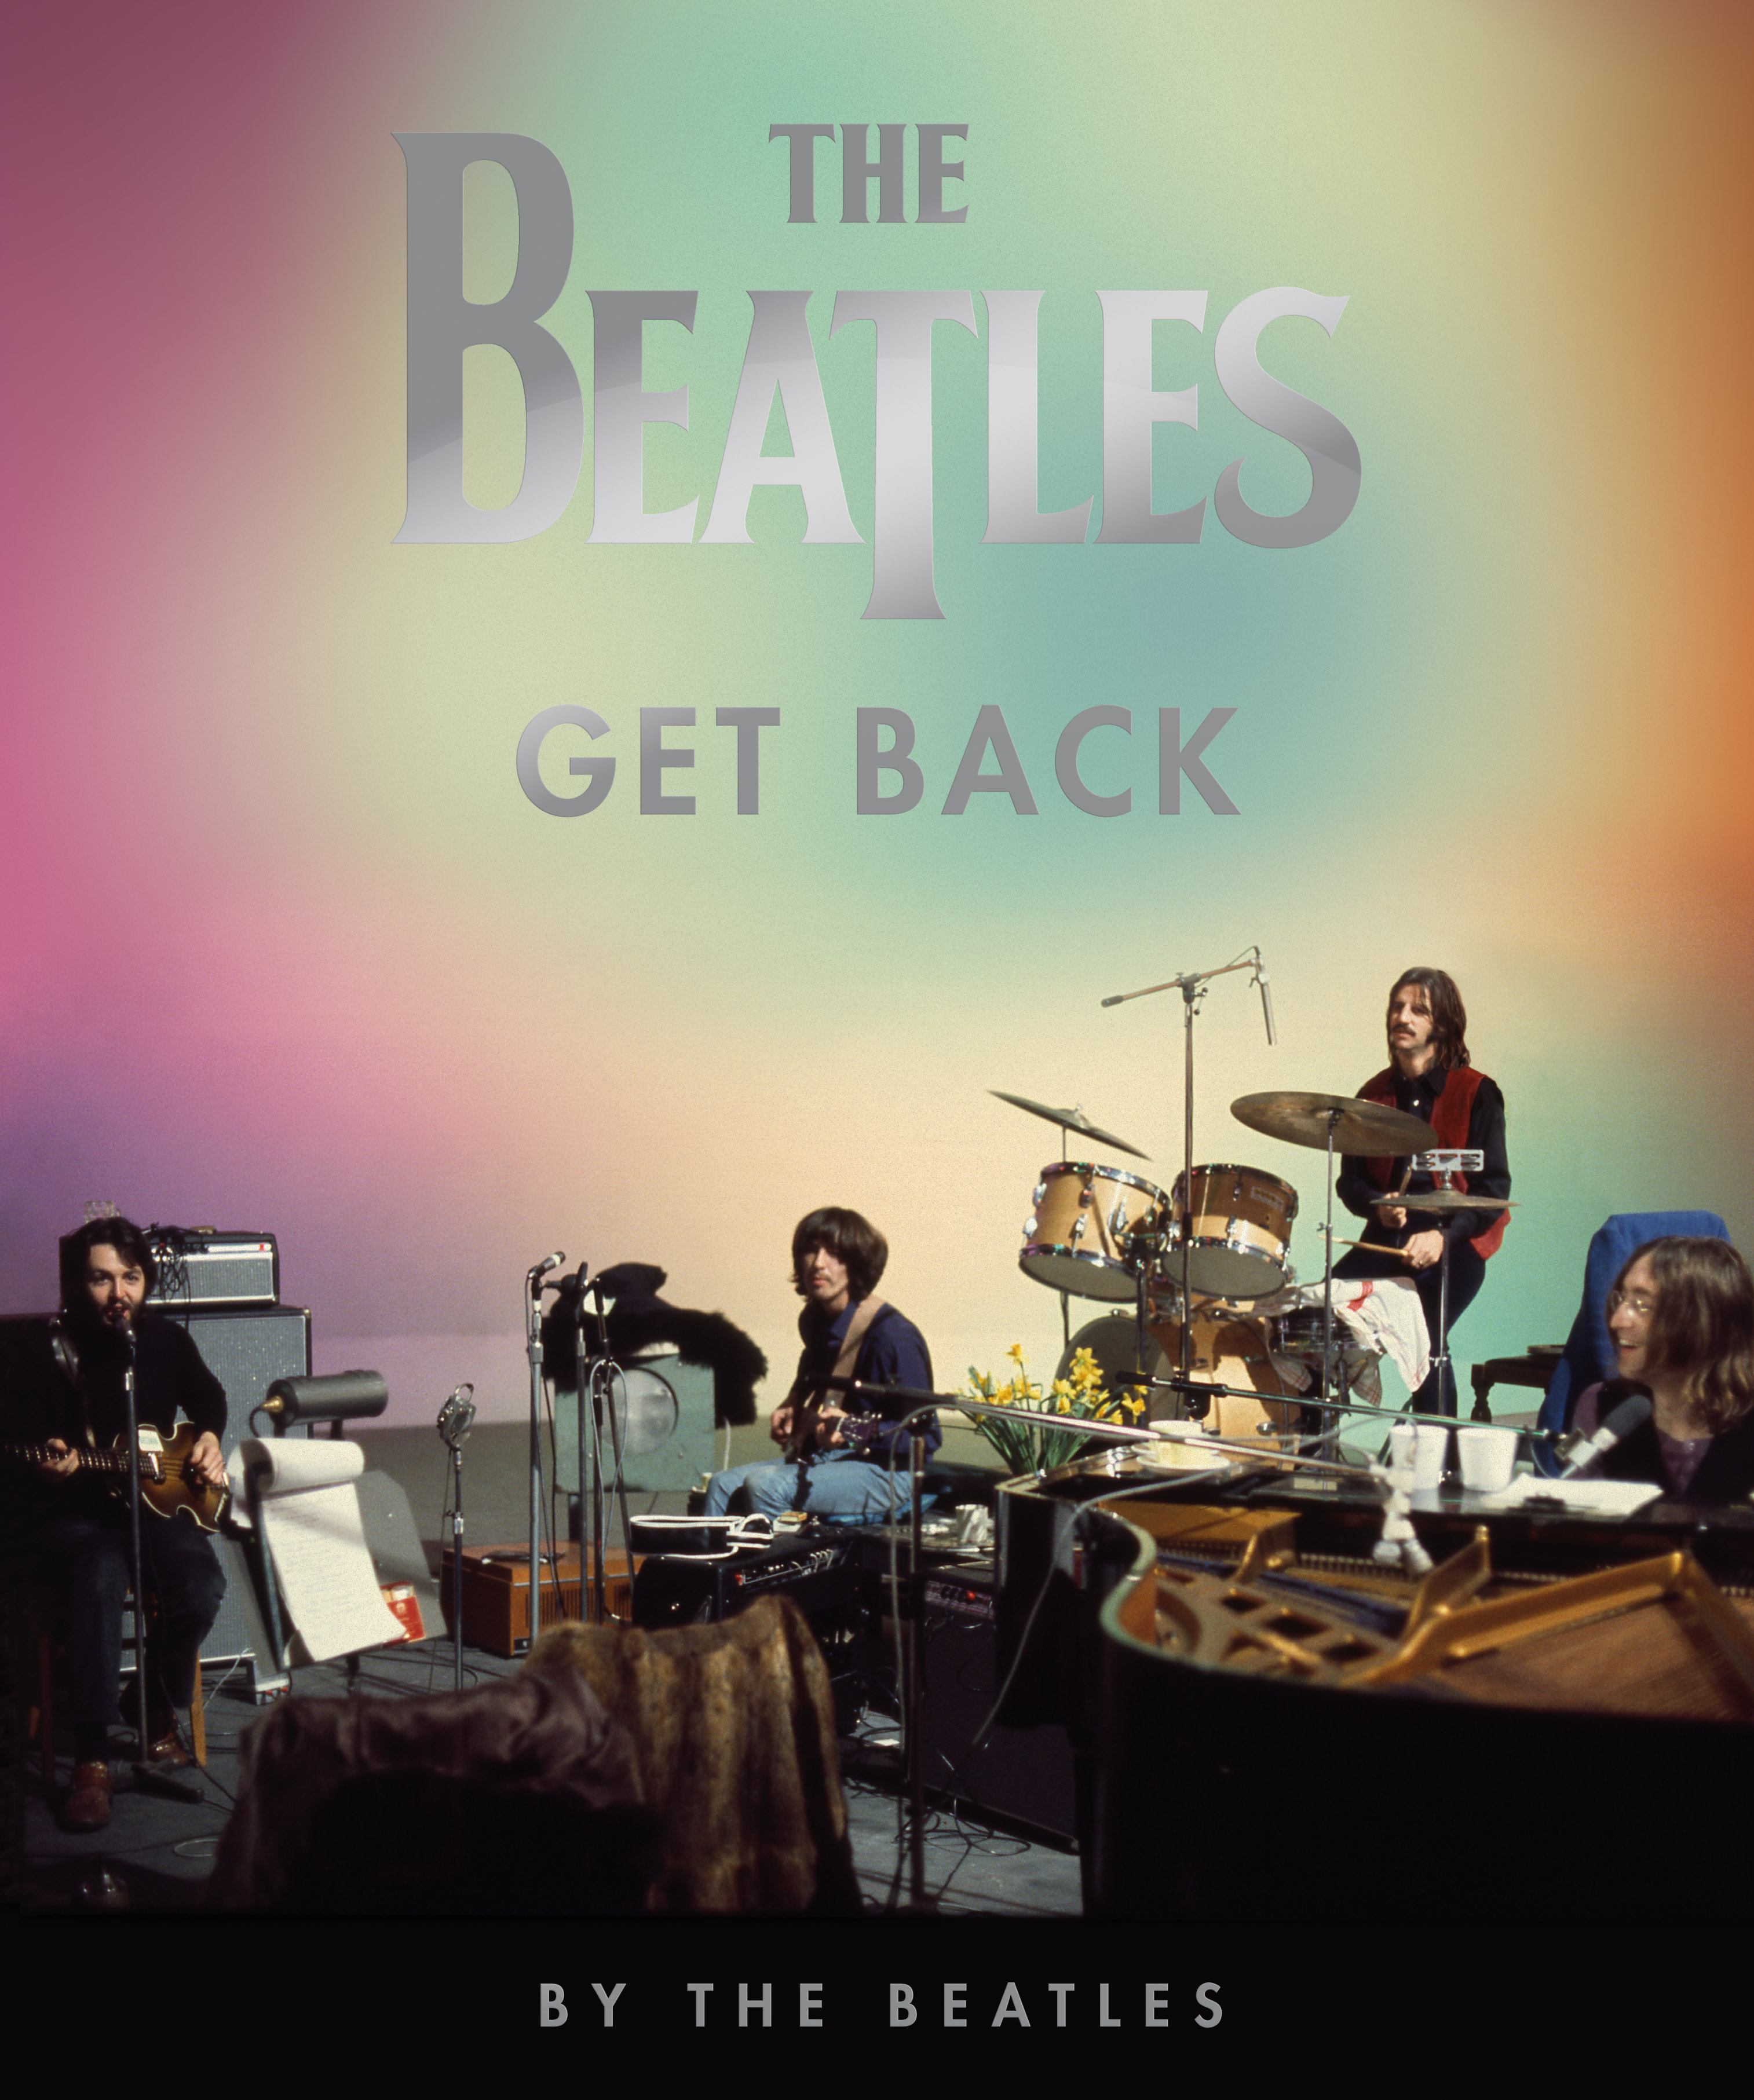 ANNOUNCING THE BEATLES: GET BACK - The Beatles’ First Official Book Since the Bestselling The Beatles Anthology